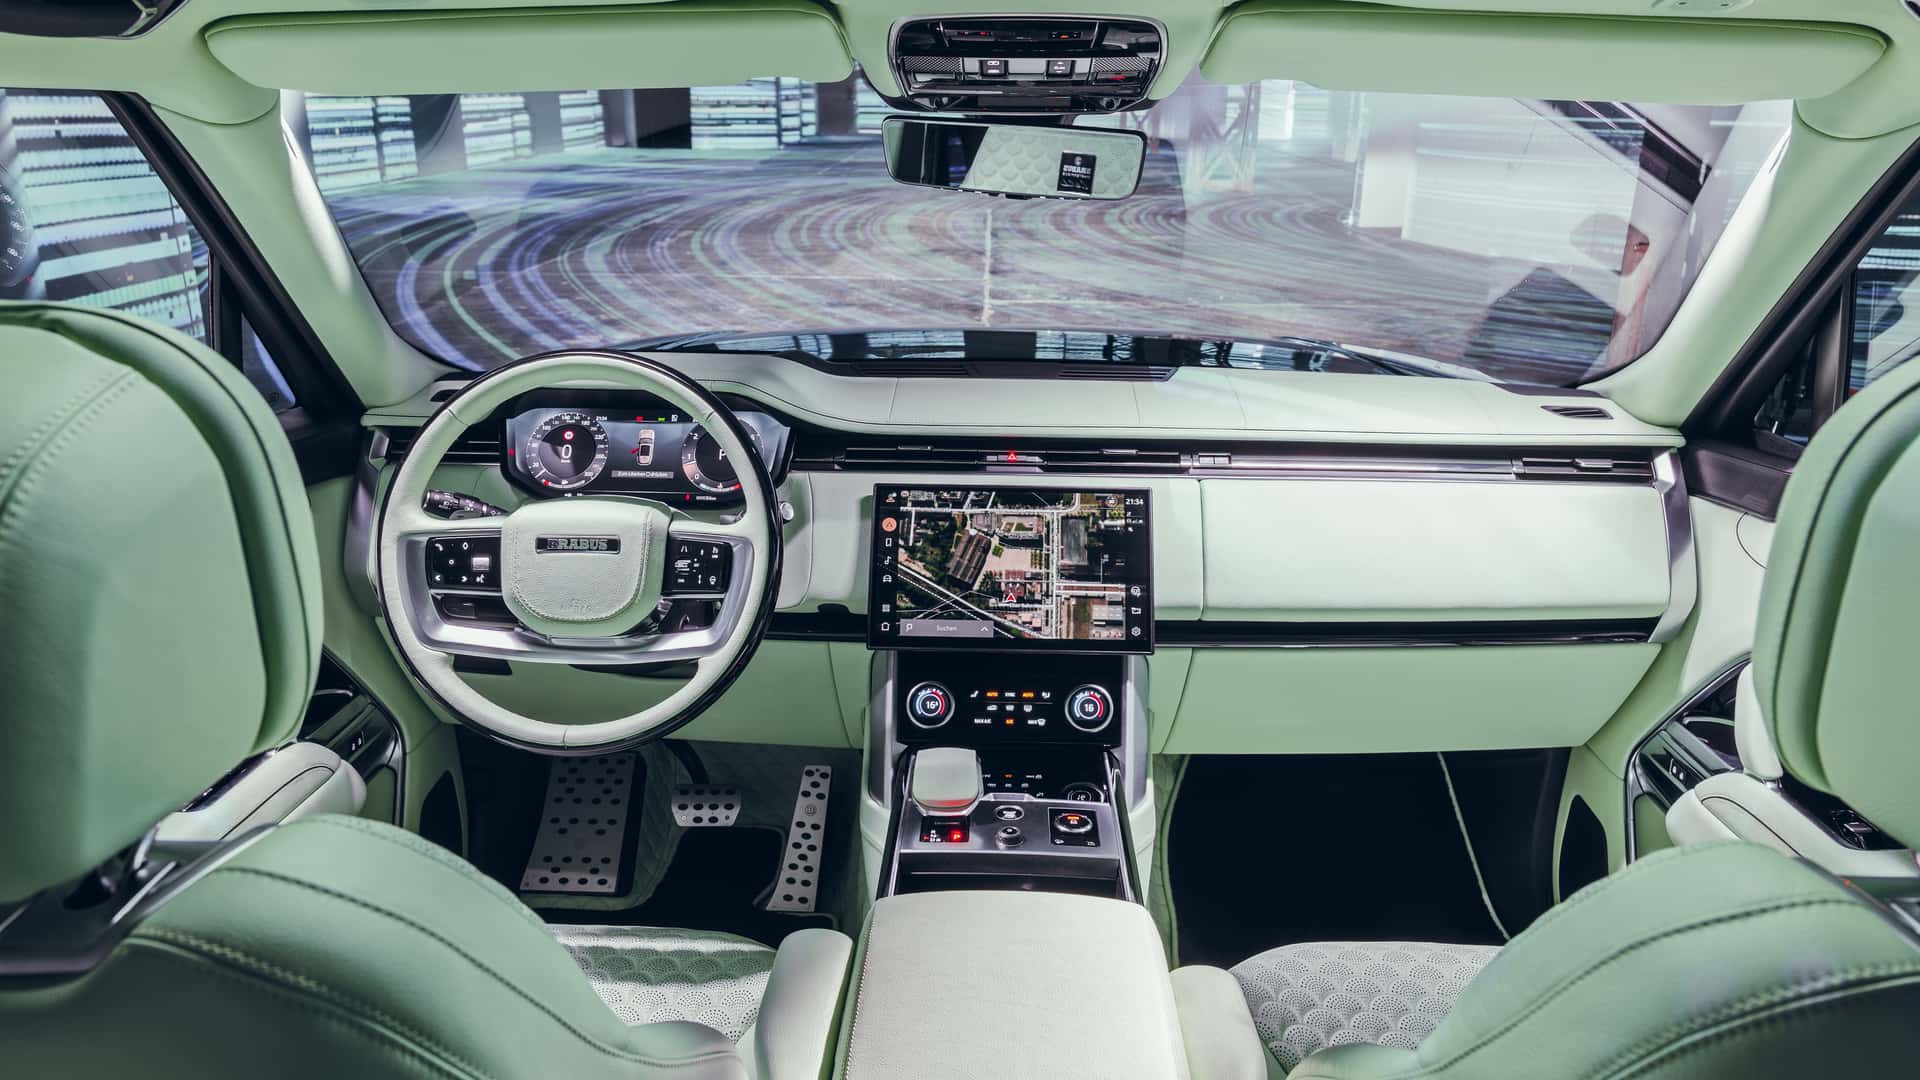 brabus 600: a five-door supercar with pistachio upholstery!